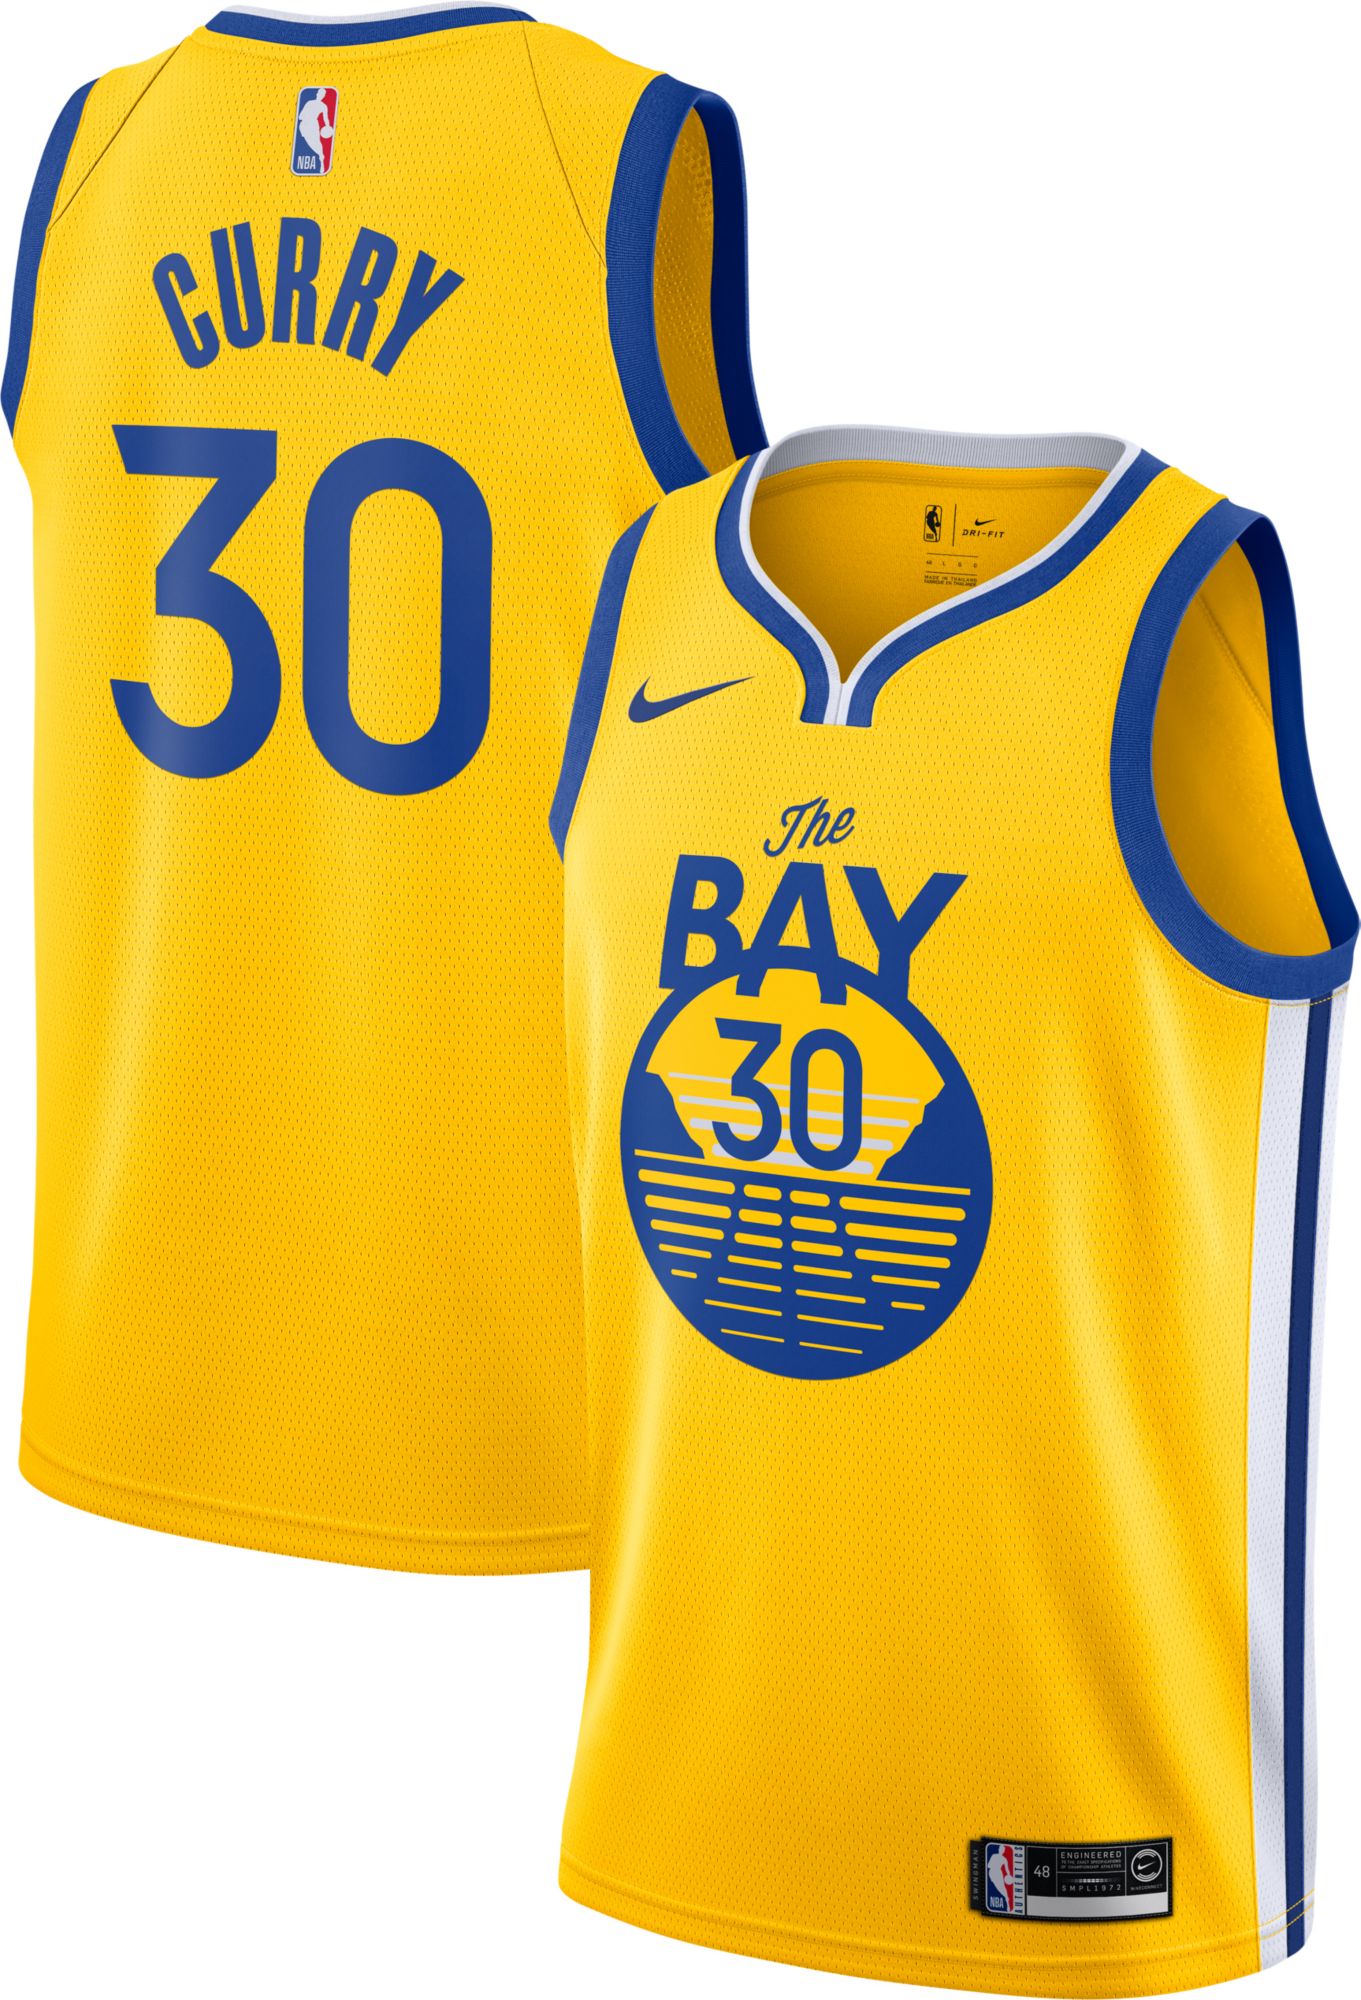 stephen curry jersey sales